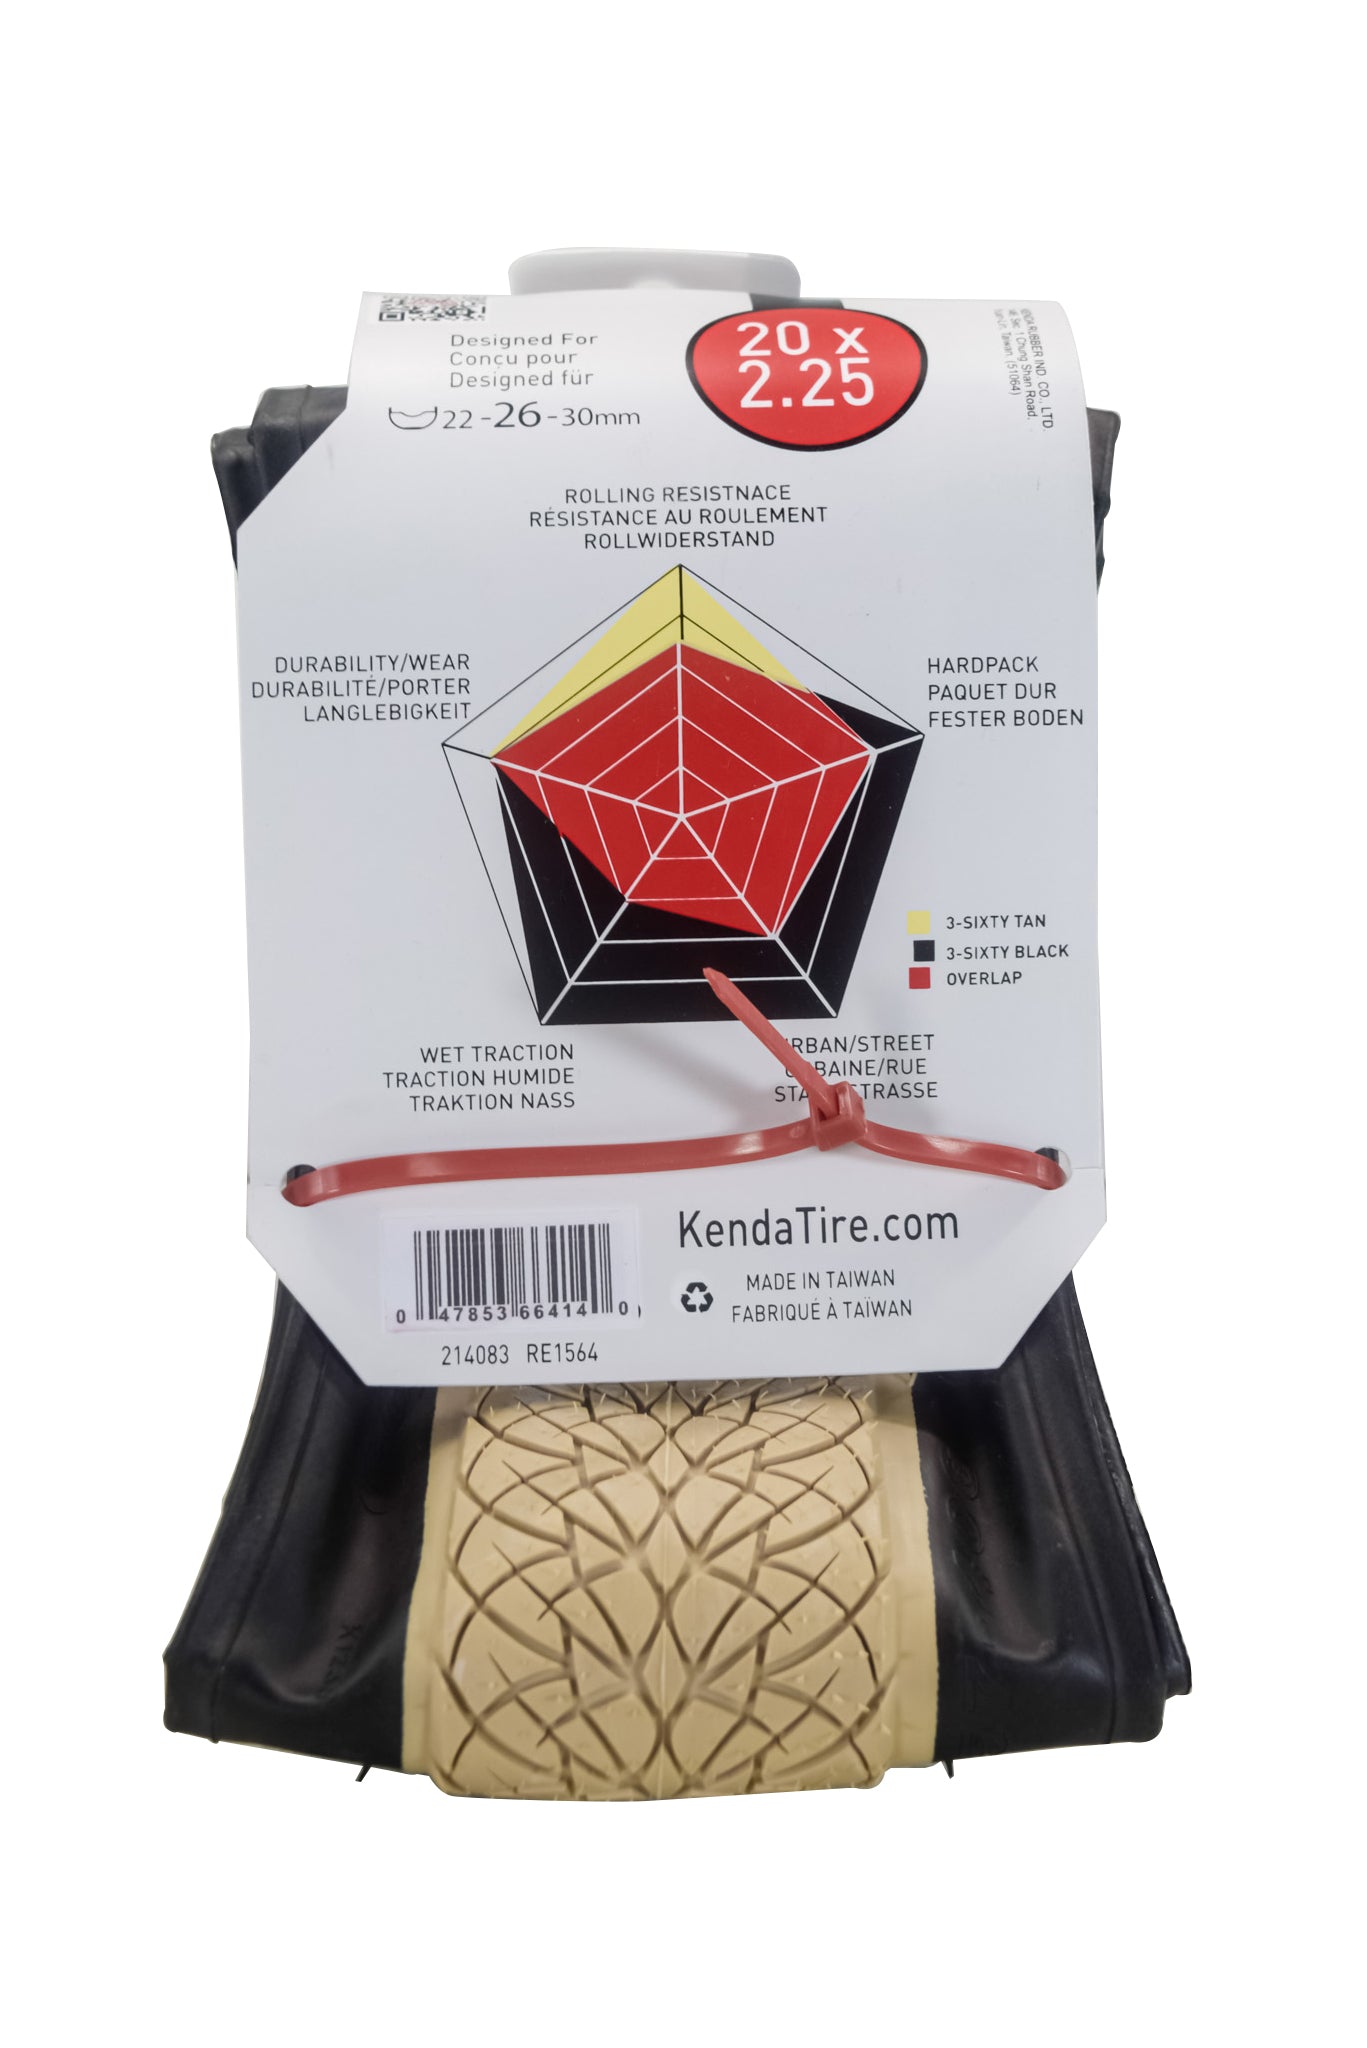 Kenda 3-Sixty Pro TR 120tpi Fold Tan 20x2.25 Bicycle Tire & Keychain (Two Pack)